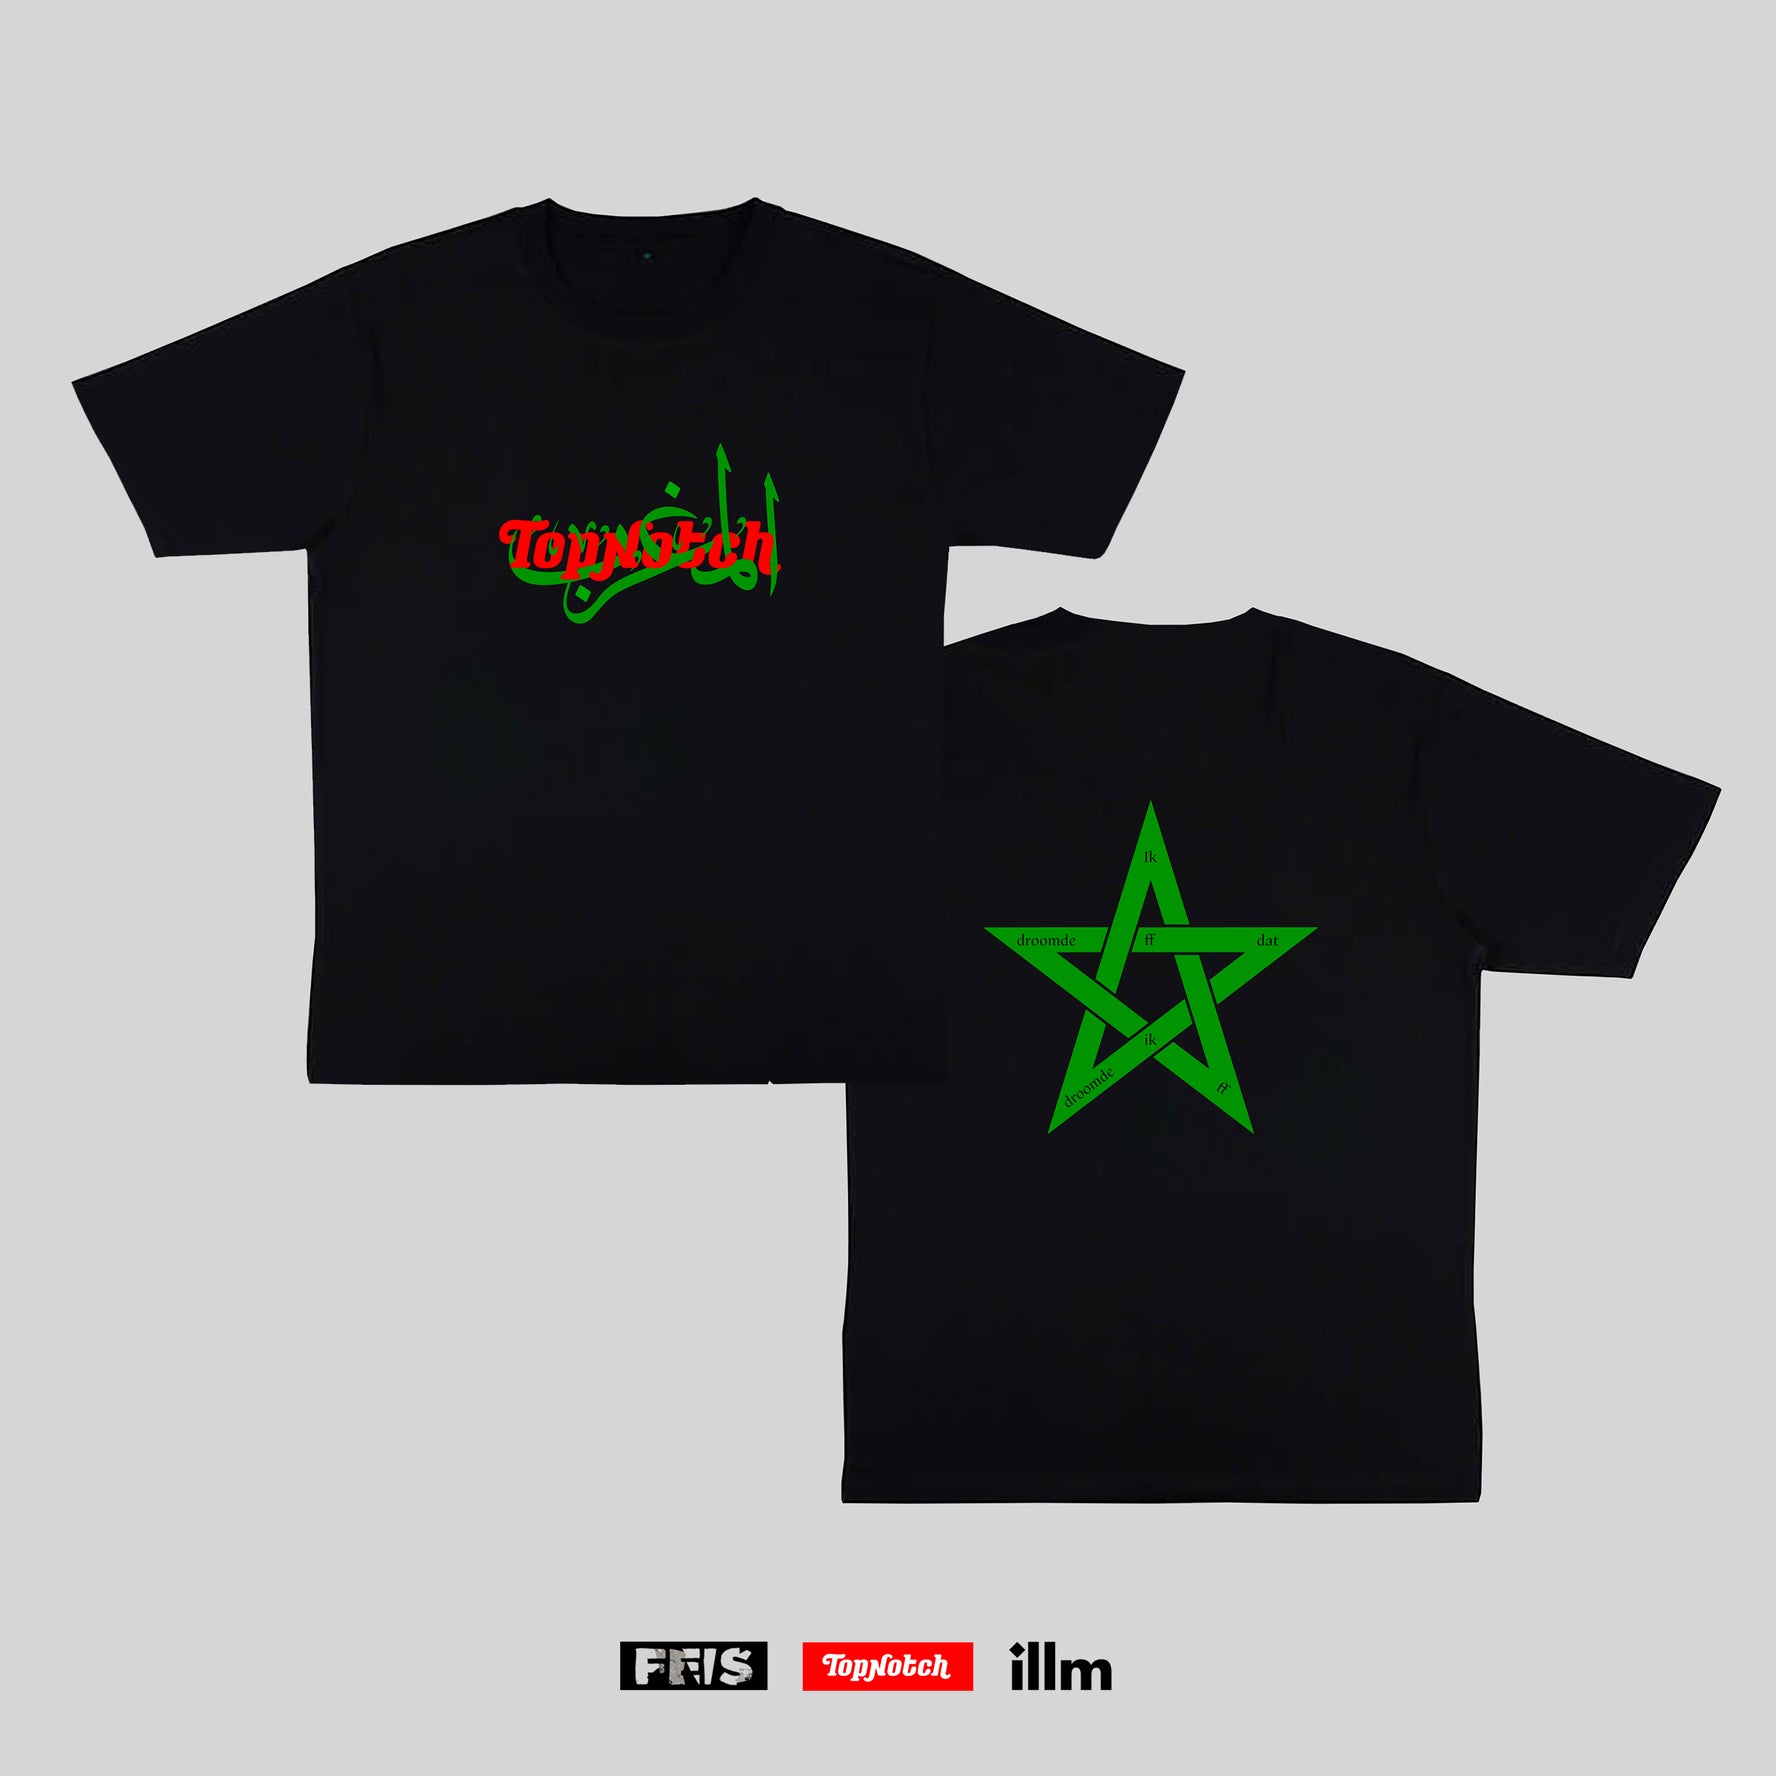 Top Notch x Stichting Feis for Morocco (Black T-Shirt)